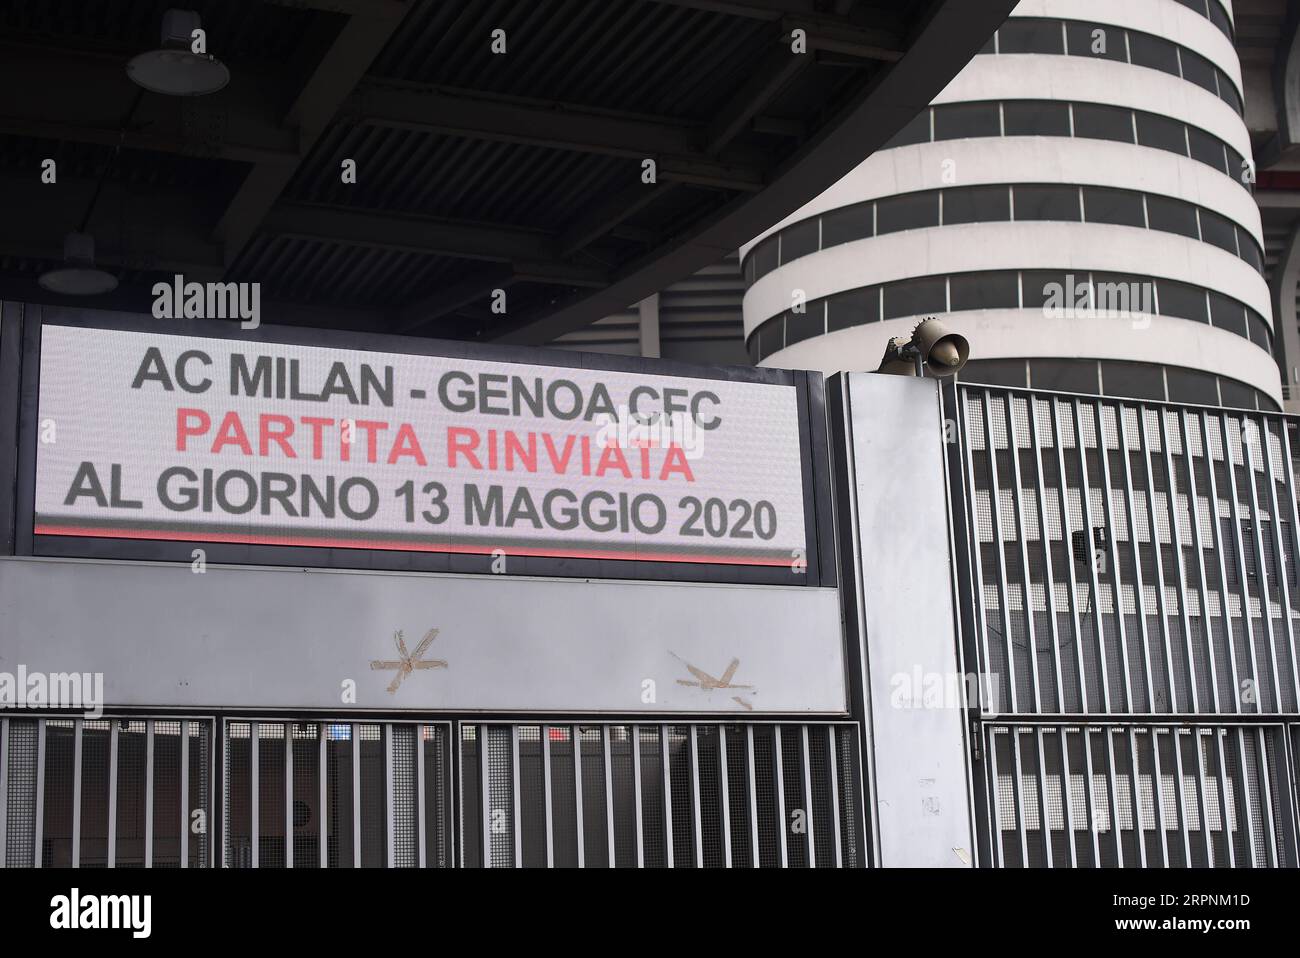 200302 -- MILAN, March 2, 2020 Xinhua -- A sign is seen outside the San Siro stadium after a Serie A soccer match between AC Milan and Genoa was postponed due to the recent coronavirus outbreak in Milan, Italy, March 1, 2020. The number of Italians infected by the coronavirus continues to accelerate, Giovanni Rezza, head of the Italian High Institute of Health s Department of Infectious Diseases, said Sunday, adding that the country was at least a week away from seeing a peak in the outbreak. According to Angelo Borrelli, Civil Protection Department chief and Extraordinary Commissioner for the Stock Photo